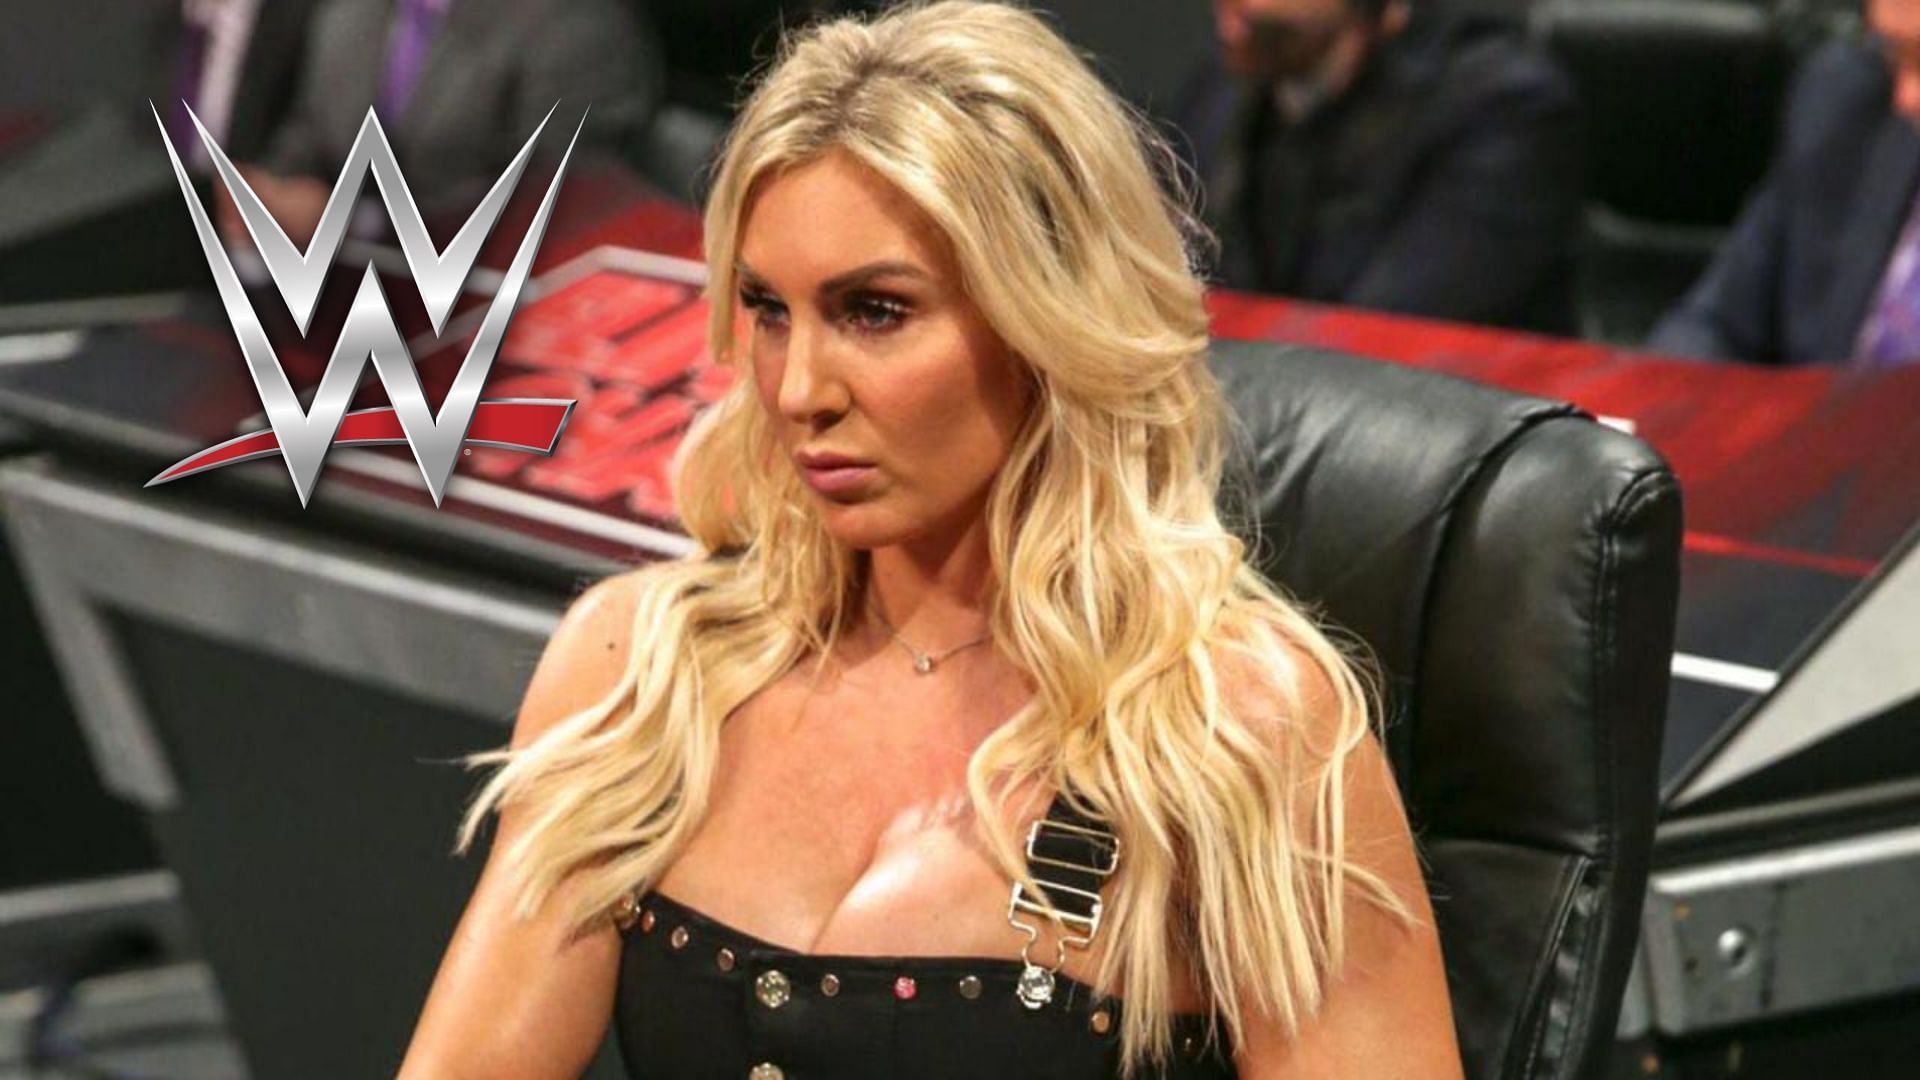 Charlotte Flair recently lost her SmackDown Women